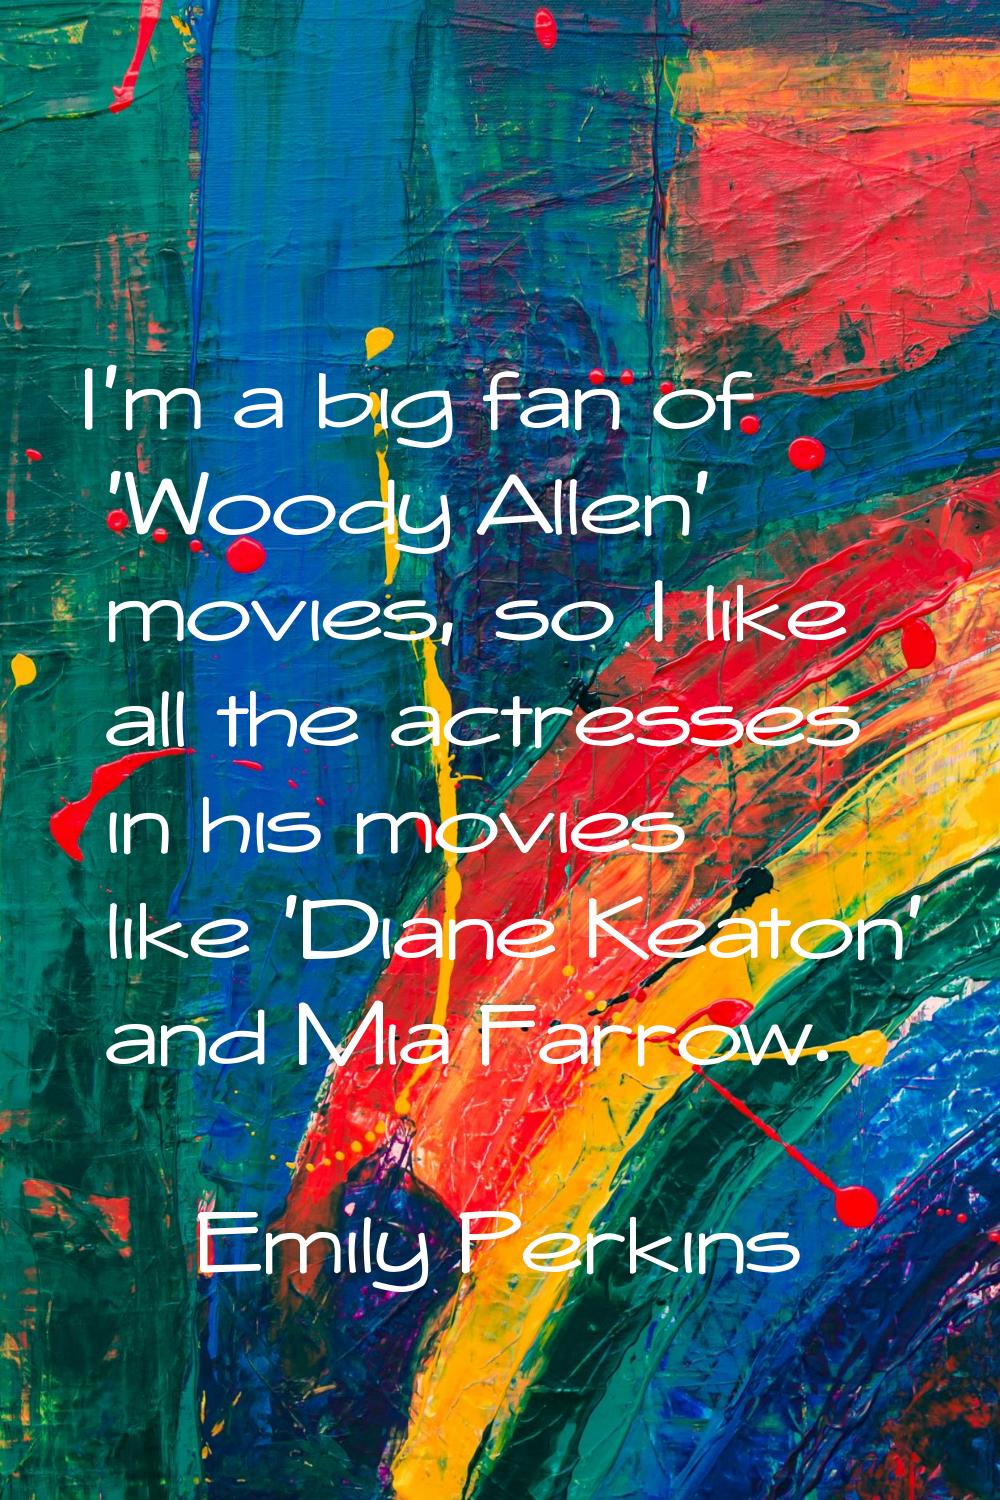 I'm a big fan of 'Woody Allen' movies, so I like all the actresses in his movies like 'Diane Keaton